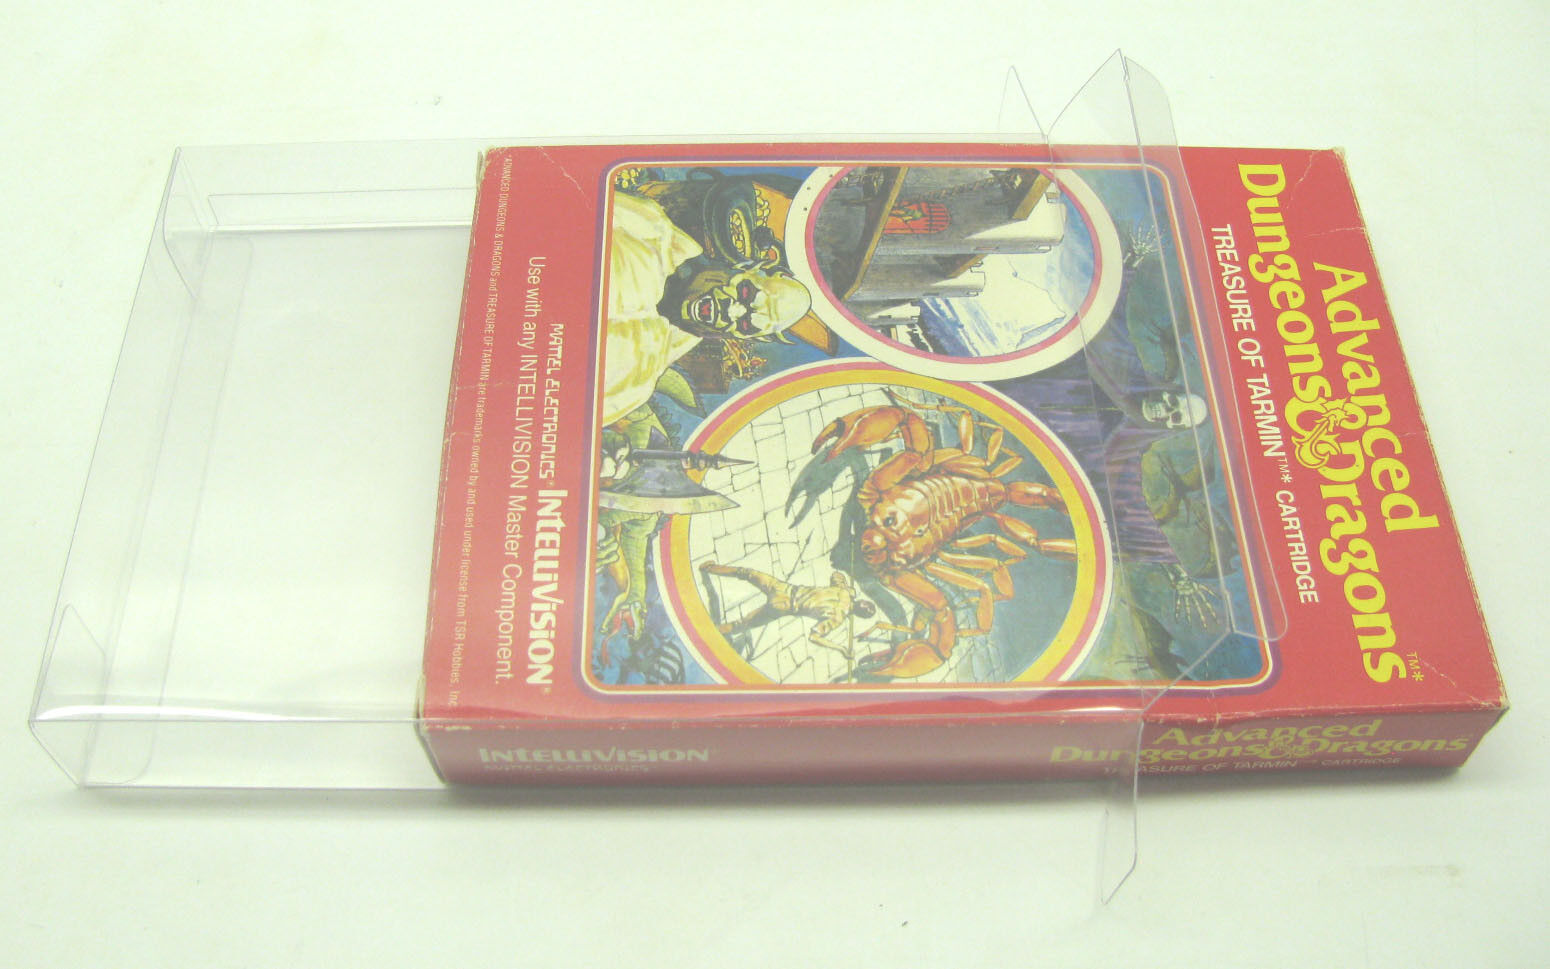 50X INTELLIVISION GAME CIB (SIZE A) - CLEAR PLASTIC PROTECTIVE BOX PROTECTORS  Dr. Retro Does Not Apply - фотография #5